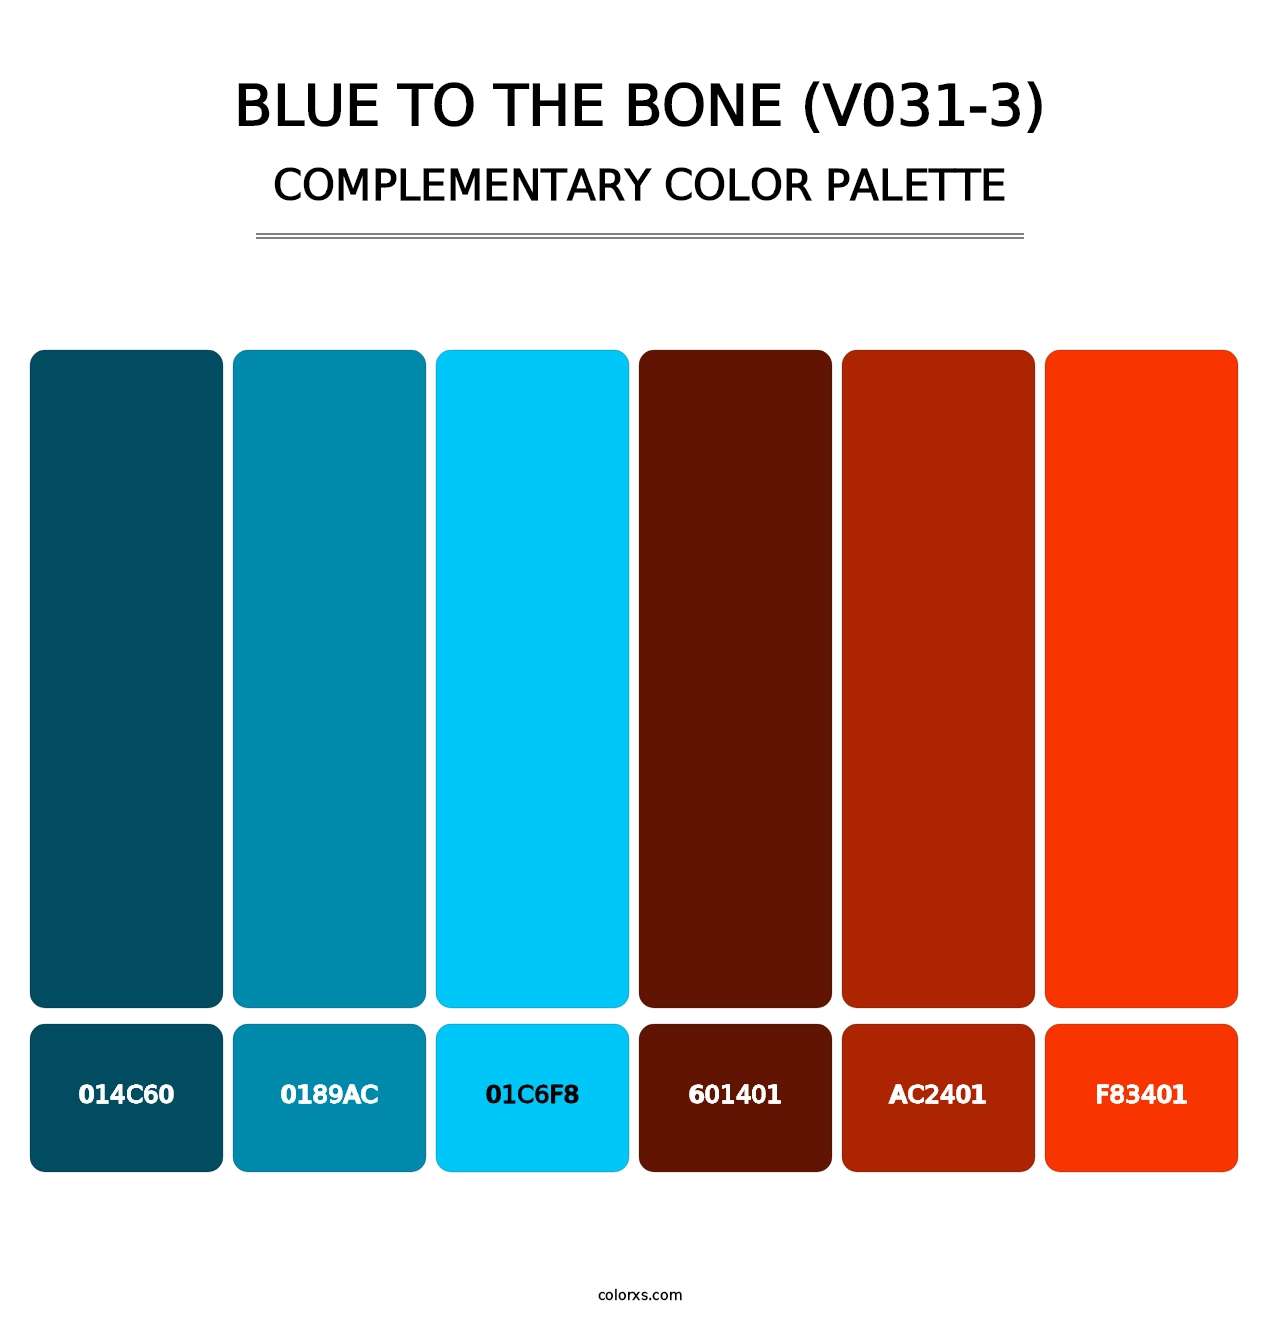 Blue to the Bone (V031-3) - Complementary Color Palette